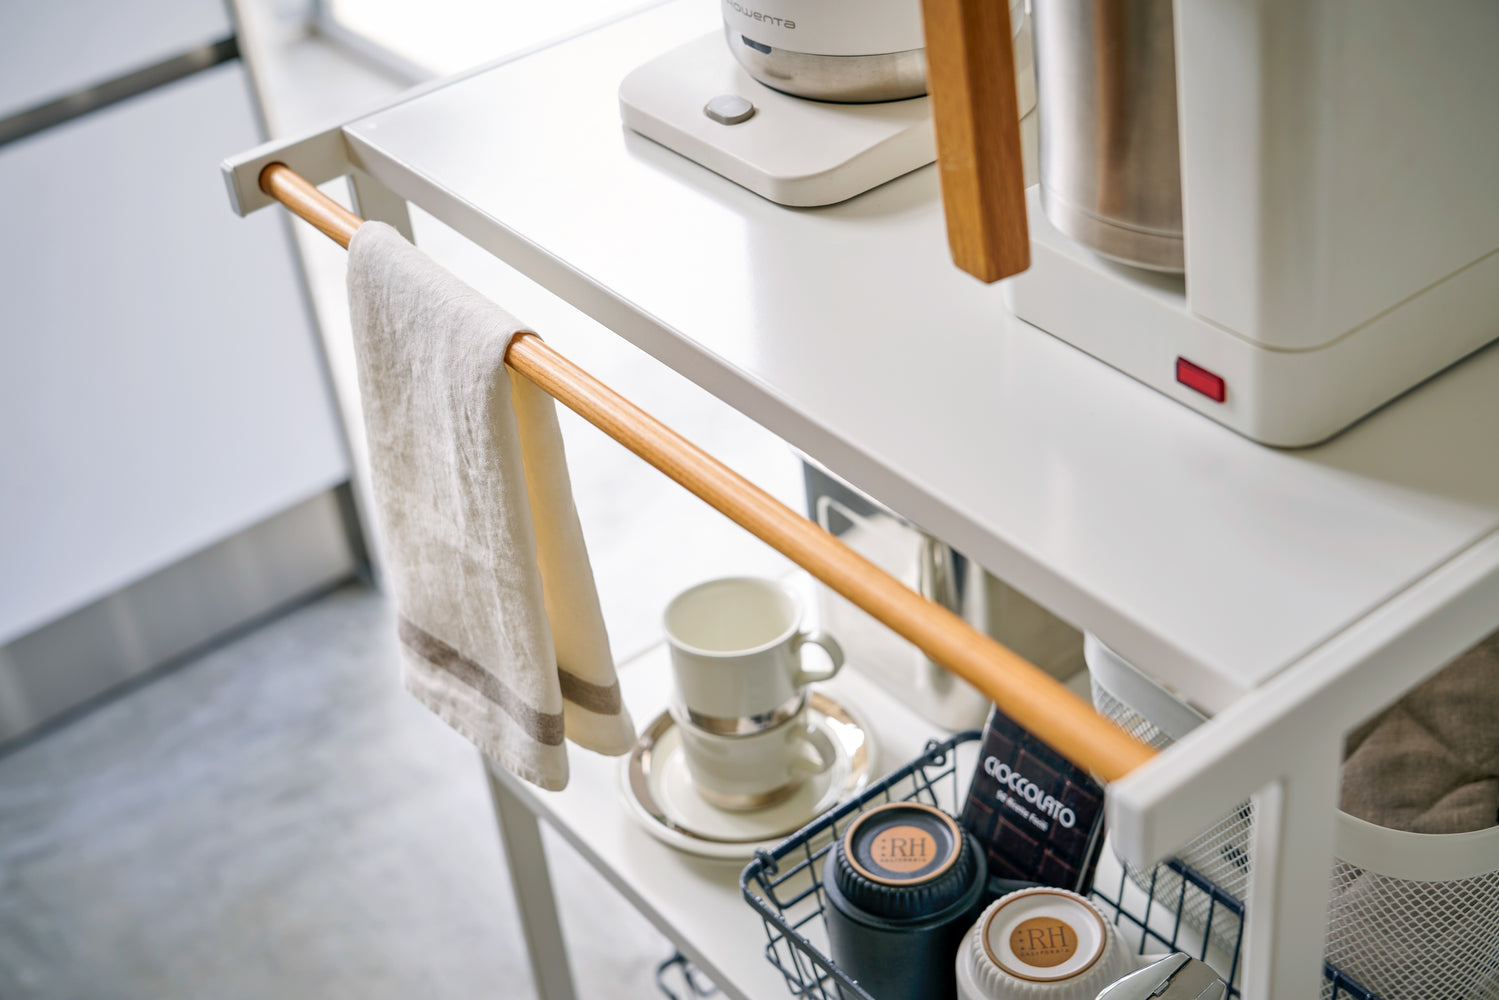 View 4 - Aerial view of white Storage Rack holding coffee brewing equipment by Yamazaki Home.